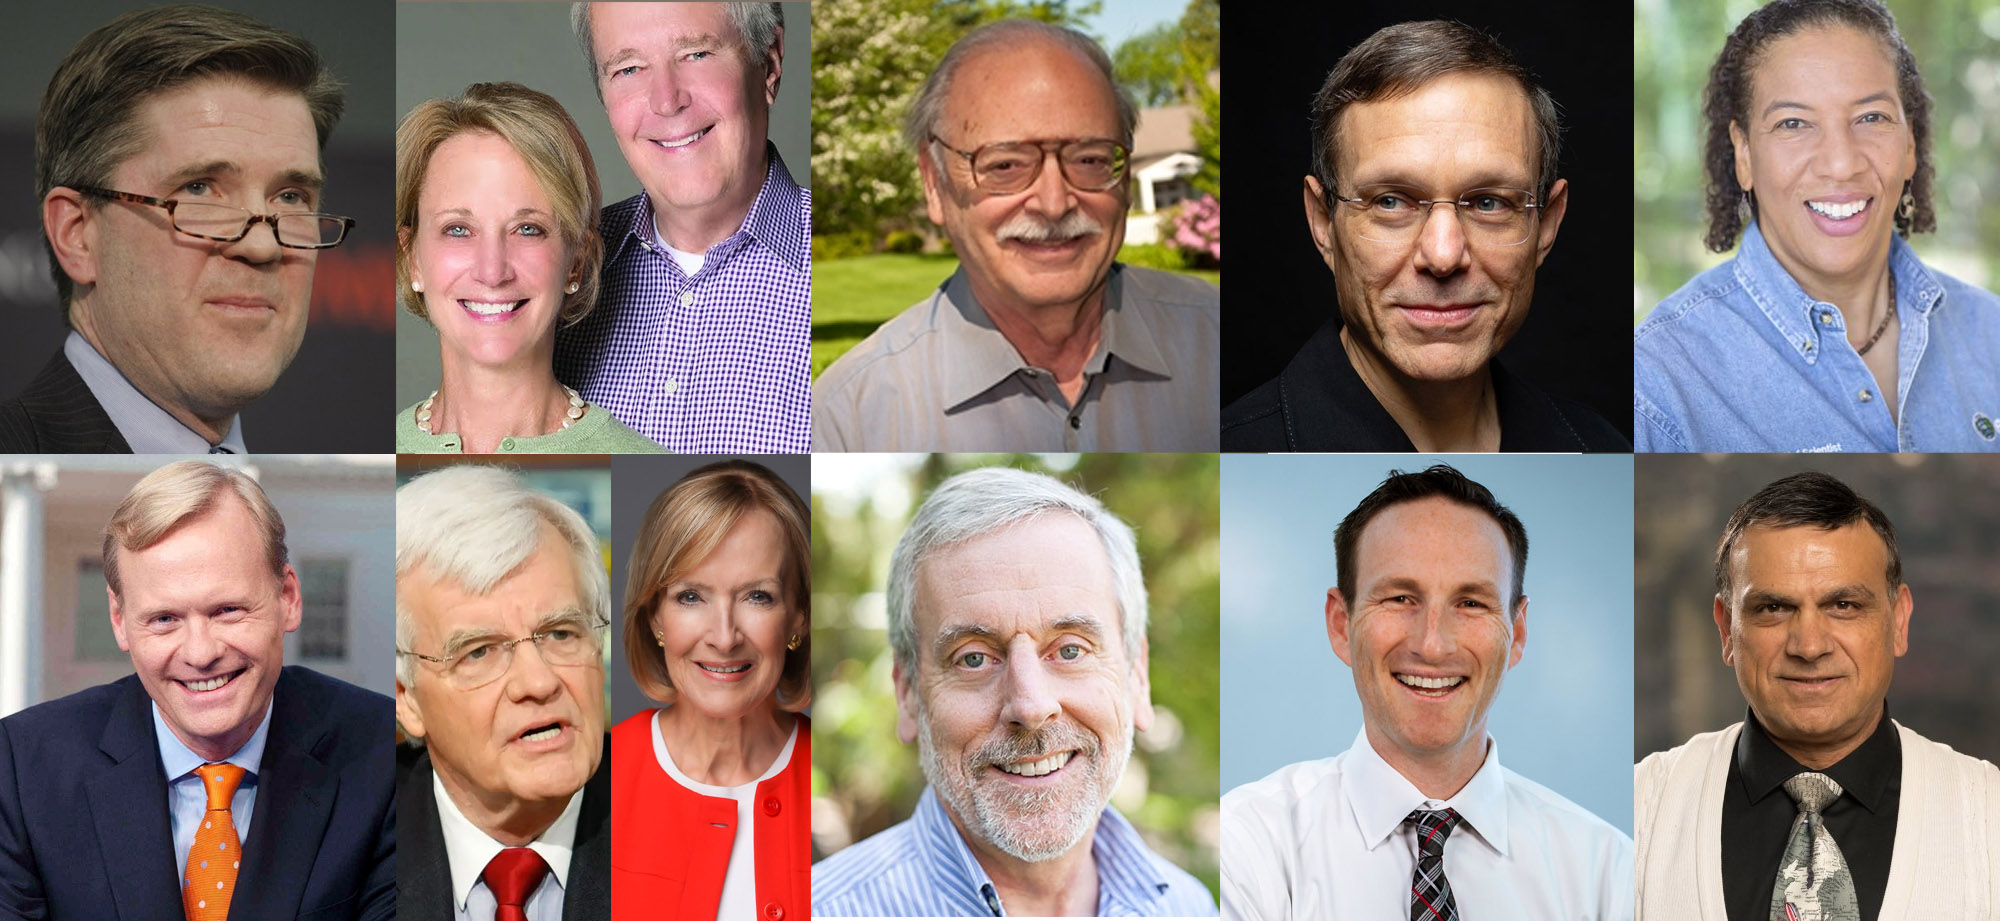 Additionally appearing at this year's JES Global Summit XIV will be John Austin, James and Deborah Fallows, Rev. Charles Brock, Avi Loeb, Dawn Wright, John Dickerson, Al Hunt and Judy Woodruff, Allen Carroll, Josh Fryday and Baher Ghosheh